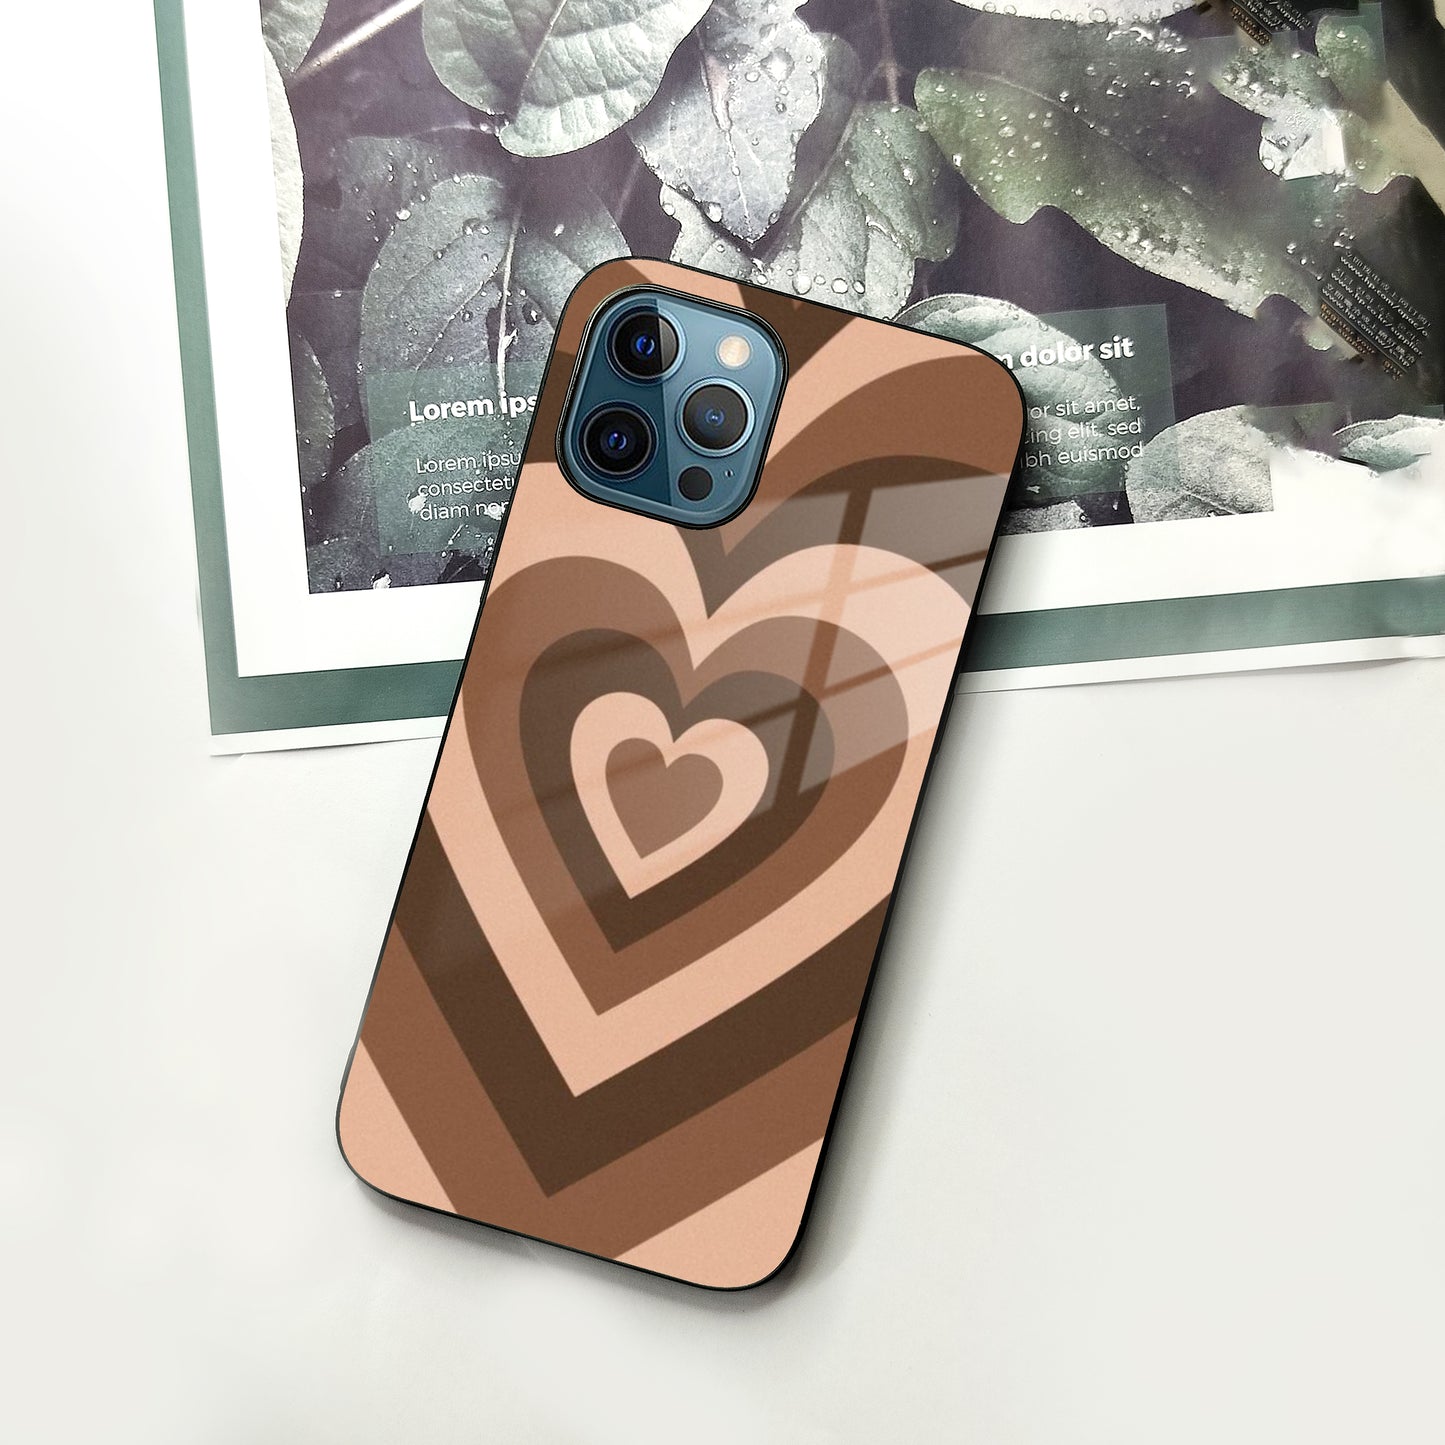 Latte Love Patter Glass Case Cover - Coffee For iPhone